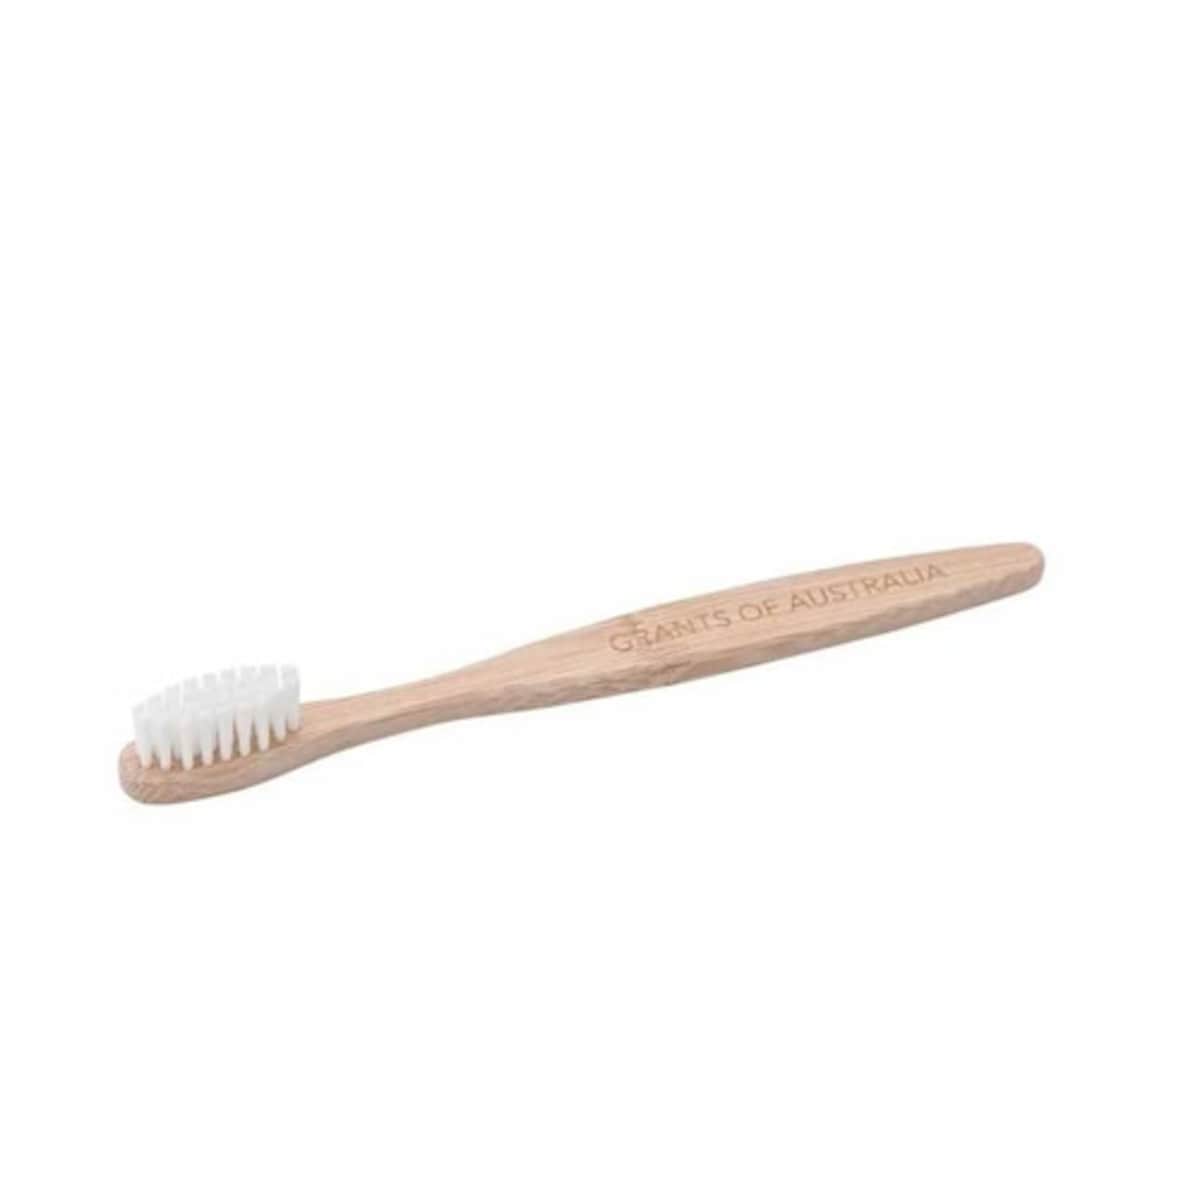 Grants Kids Bamboo Toothbrush Ultra Soft 1 Pack